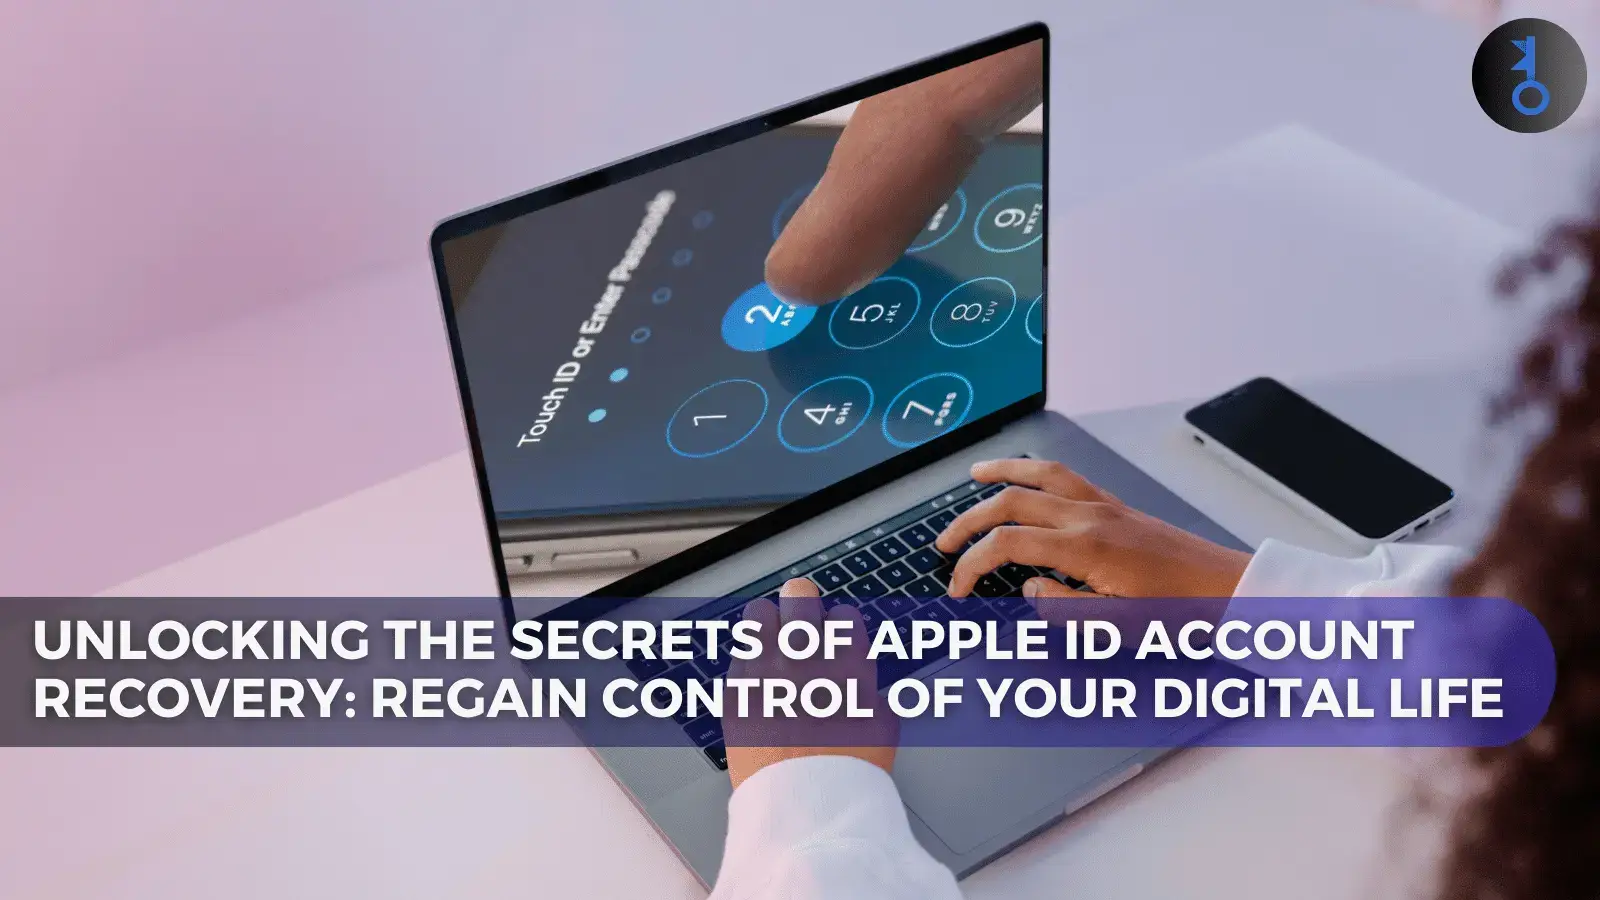 Unlocking the Secrets of Apple ID Account Recovery Regain Control of Your Digital Life (1)